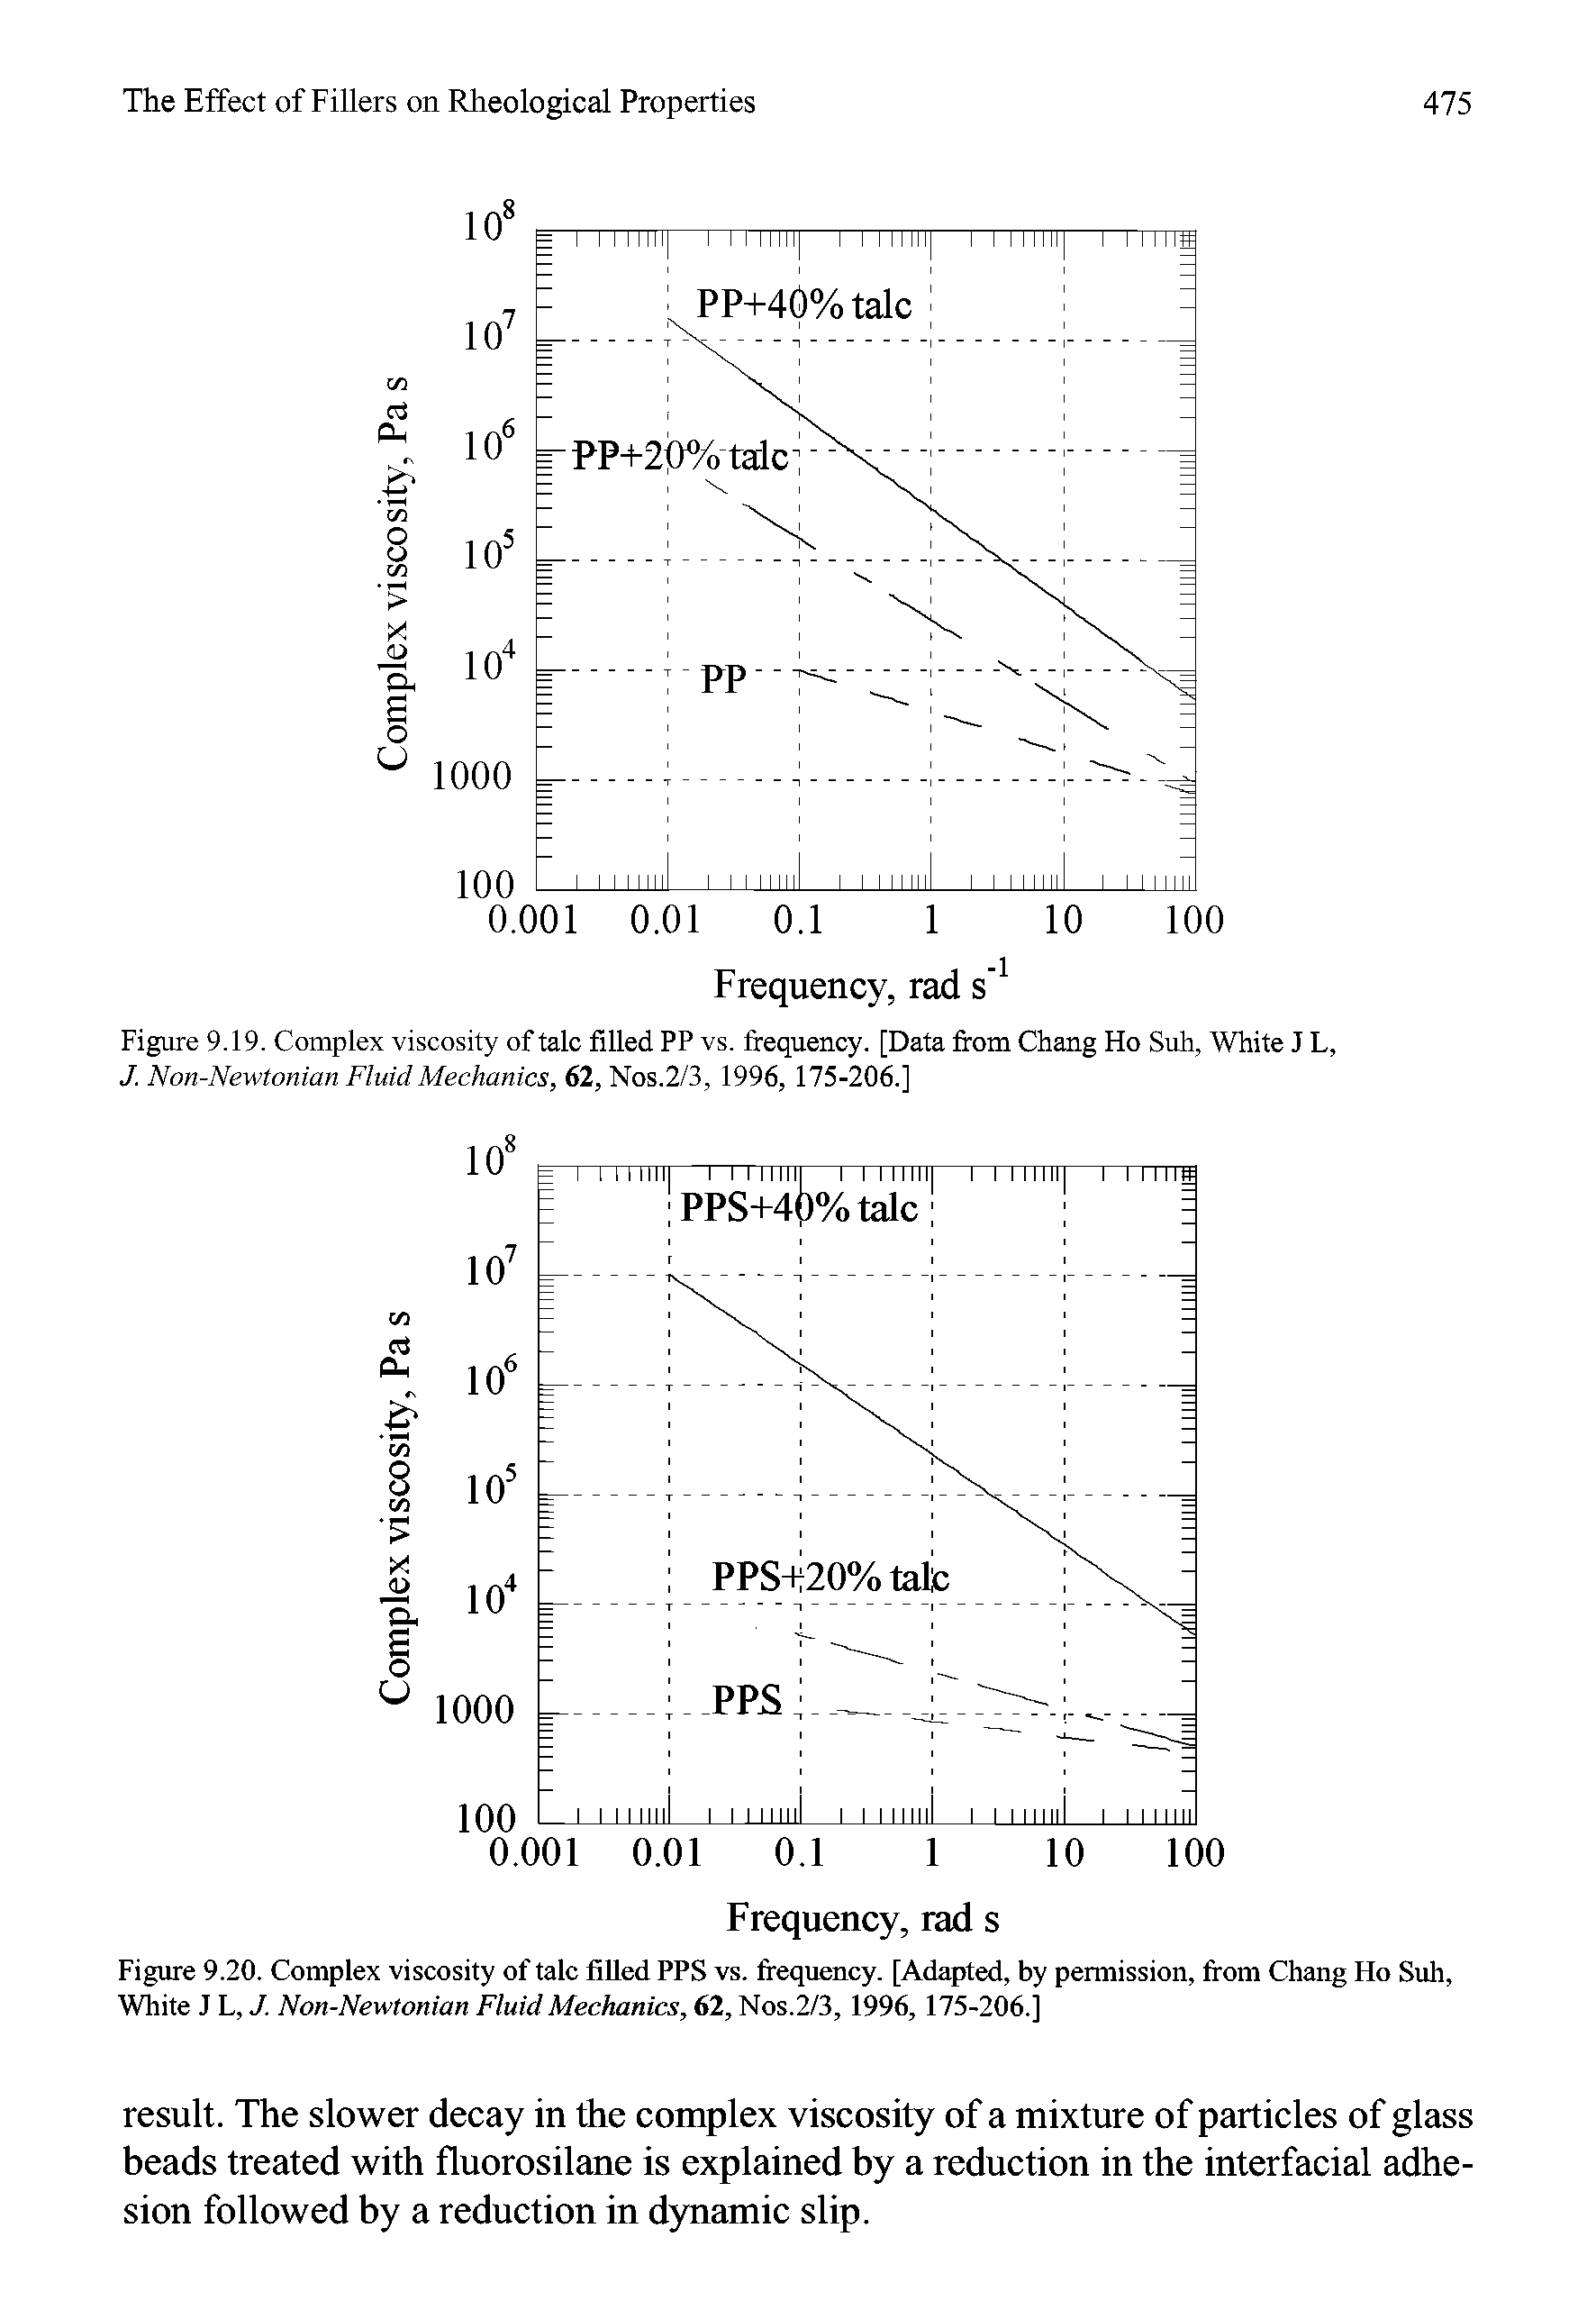 Figure 9.19. Complex viscosity of talc filled PP vs. frequency. [Data from Chang Ho Suh, White J L, J. Non-Newtonian Fluid Mechanics, 62, Nos.2/3, 1996, 175-206.]...